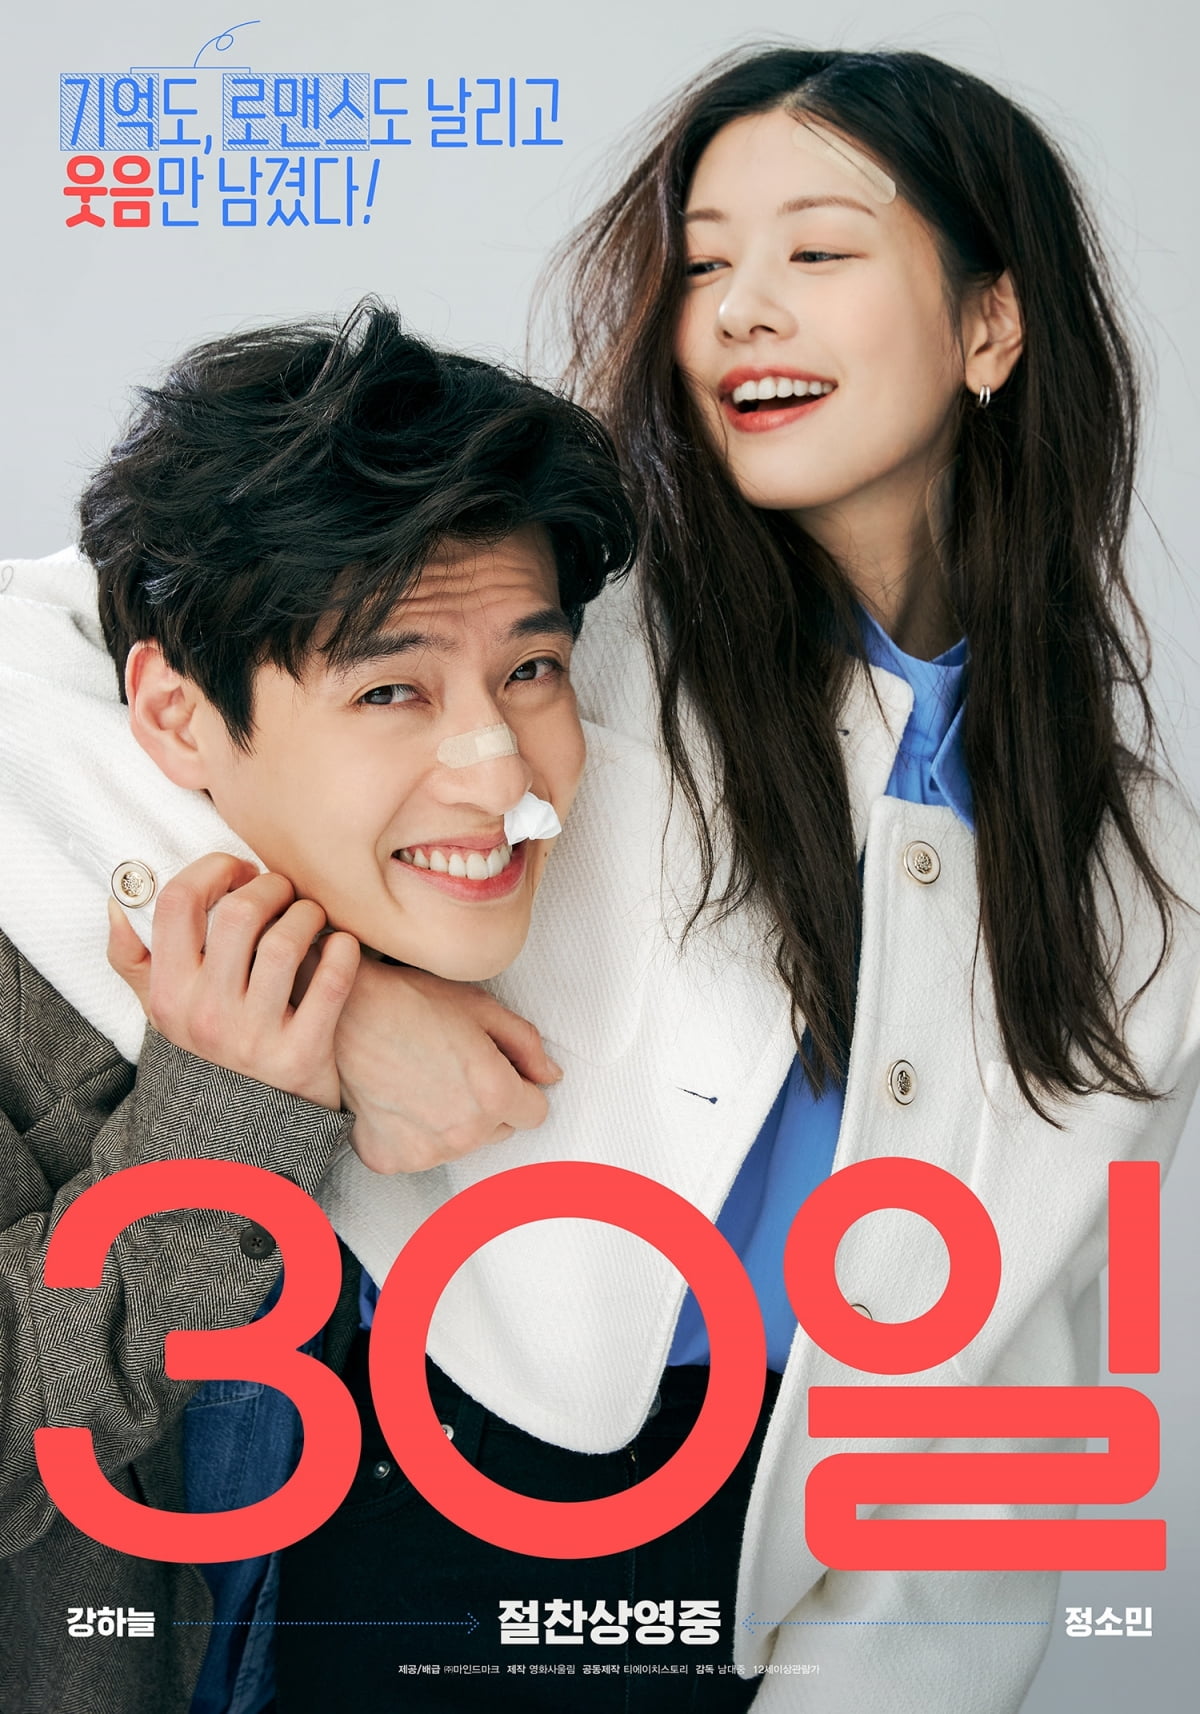 Great! Kang Ha-neul and Jung So-min's '30 Days' achieves a feat of exceeding the break-even point of 1.6 million 